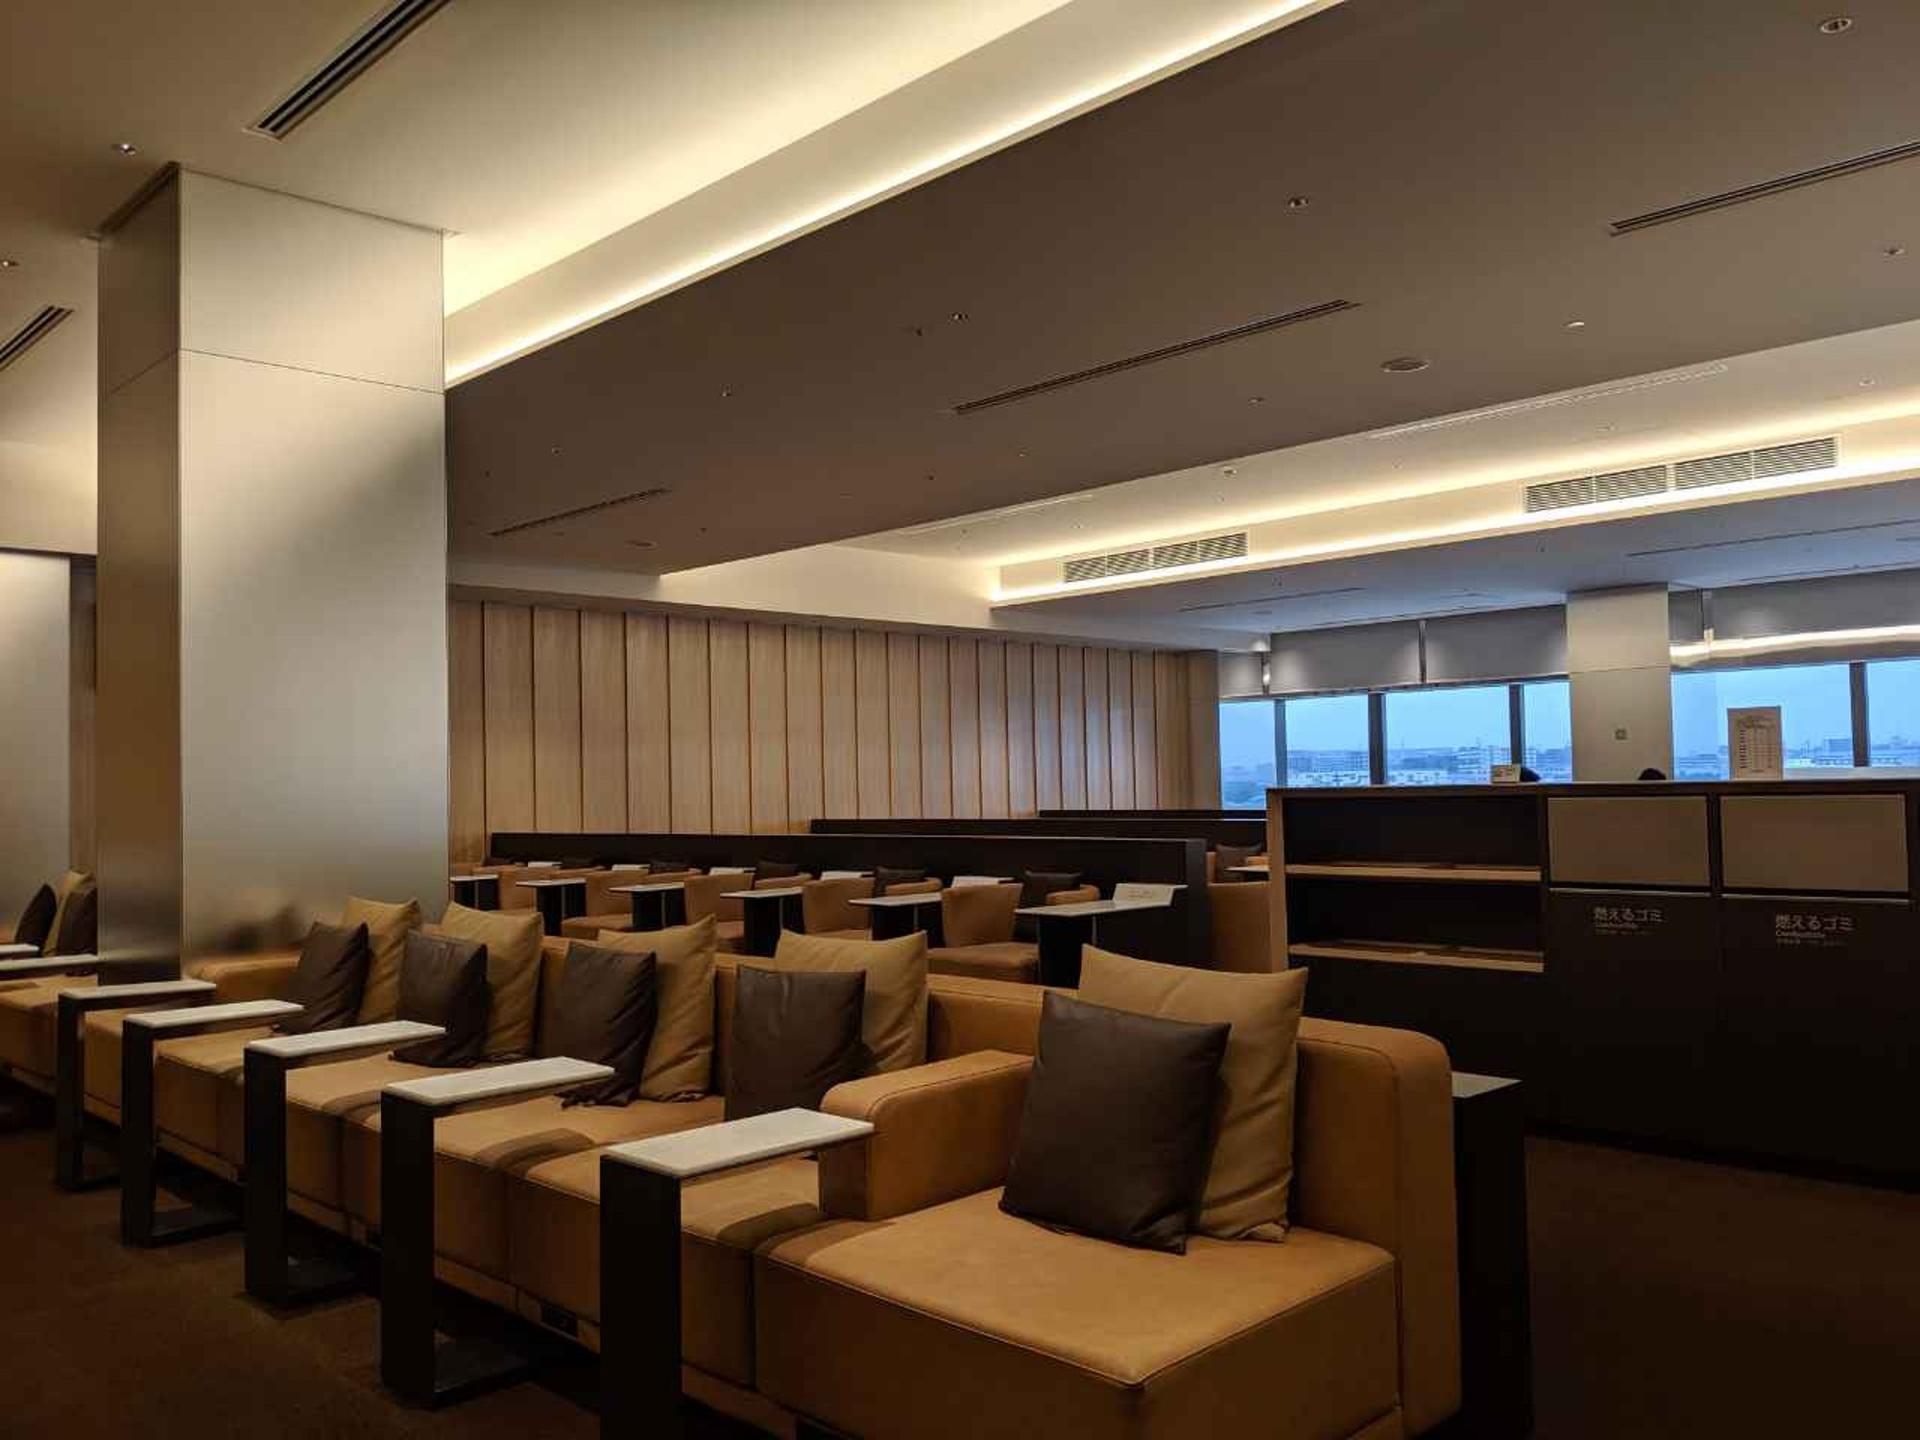 All Nippon Airways ANA Lounge image 1 of 2